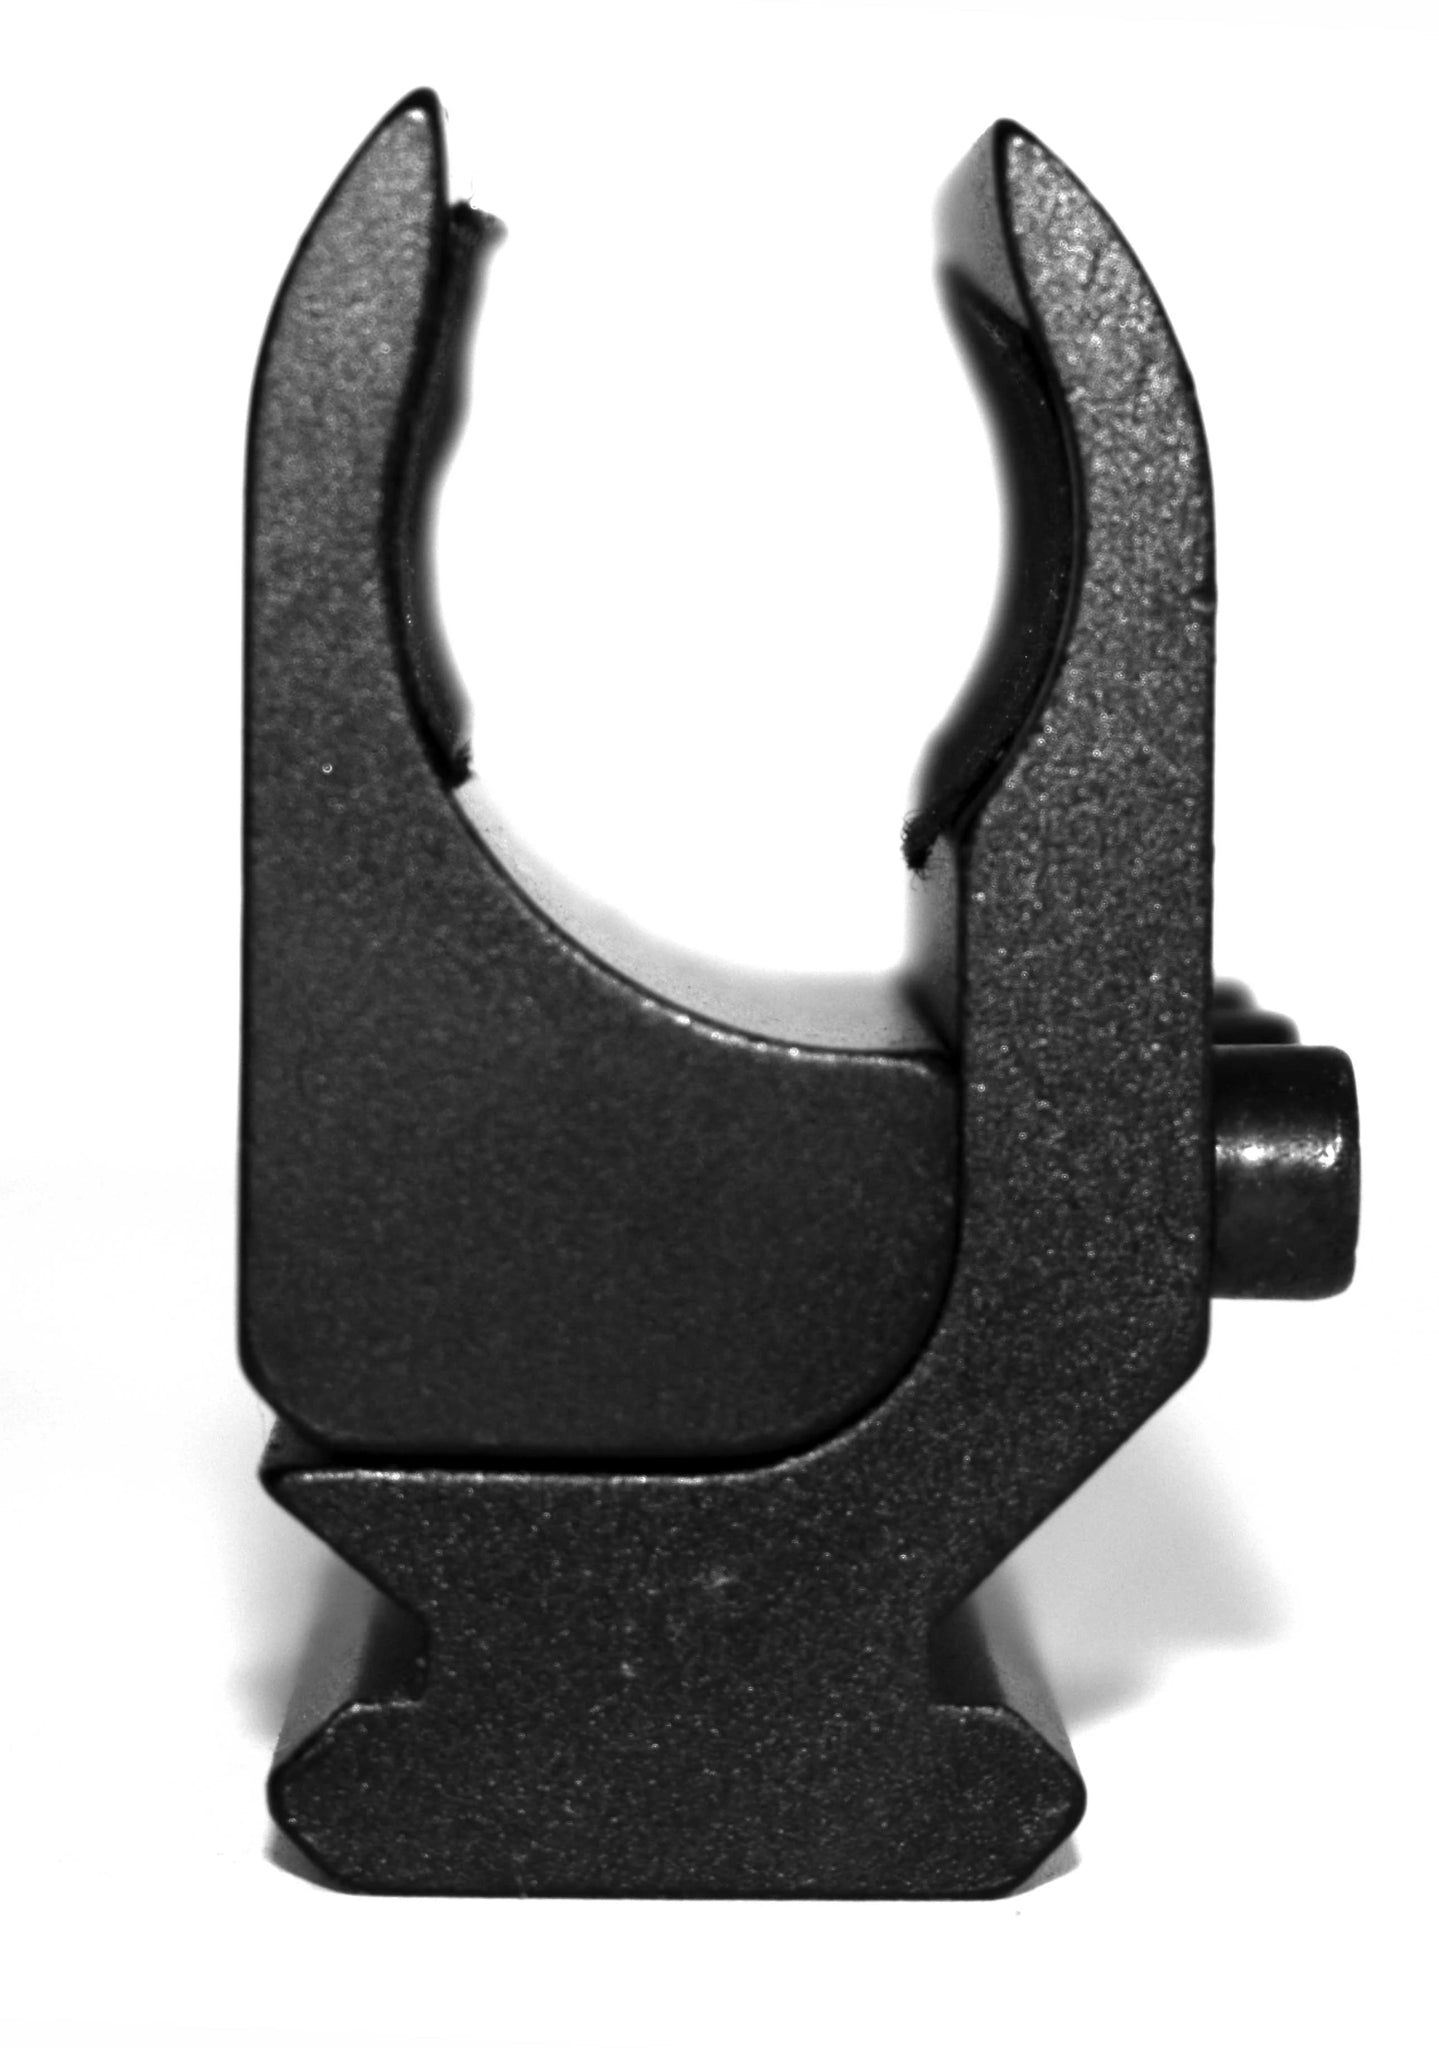 Trinity Picatinny Rail Mount Adapter Compatible with Winchester SXP Defender 12 Gauge Pump Sporting Optics Mount Aluminum Black Hunting Accessory Tactical Home Defense Upgrade Single Rail. - TRINITY SUPPLY INC